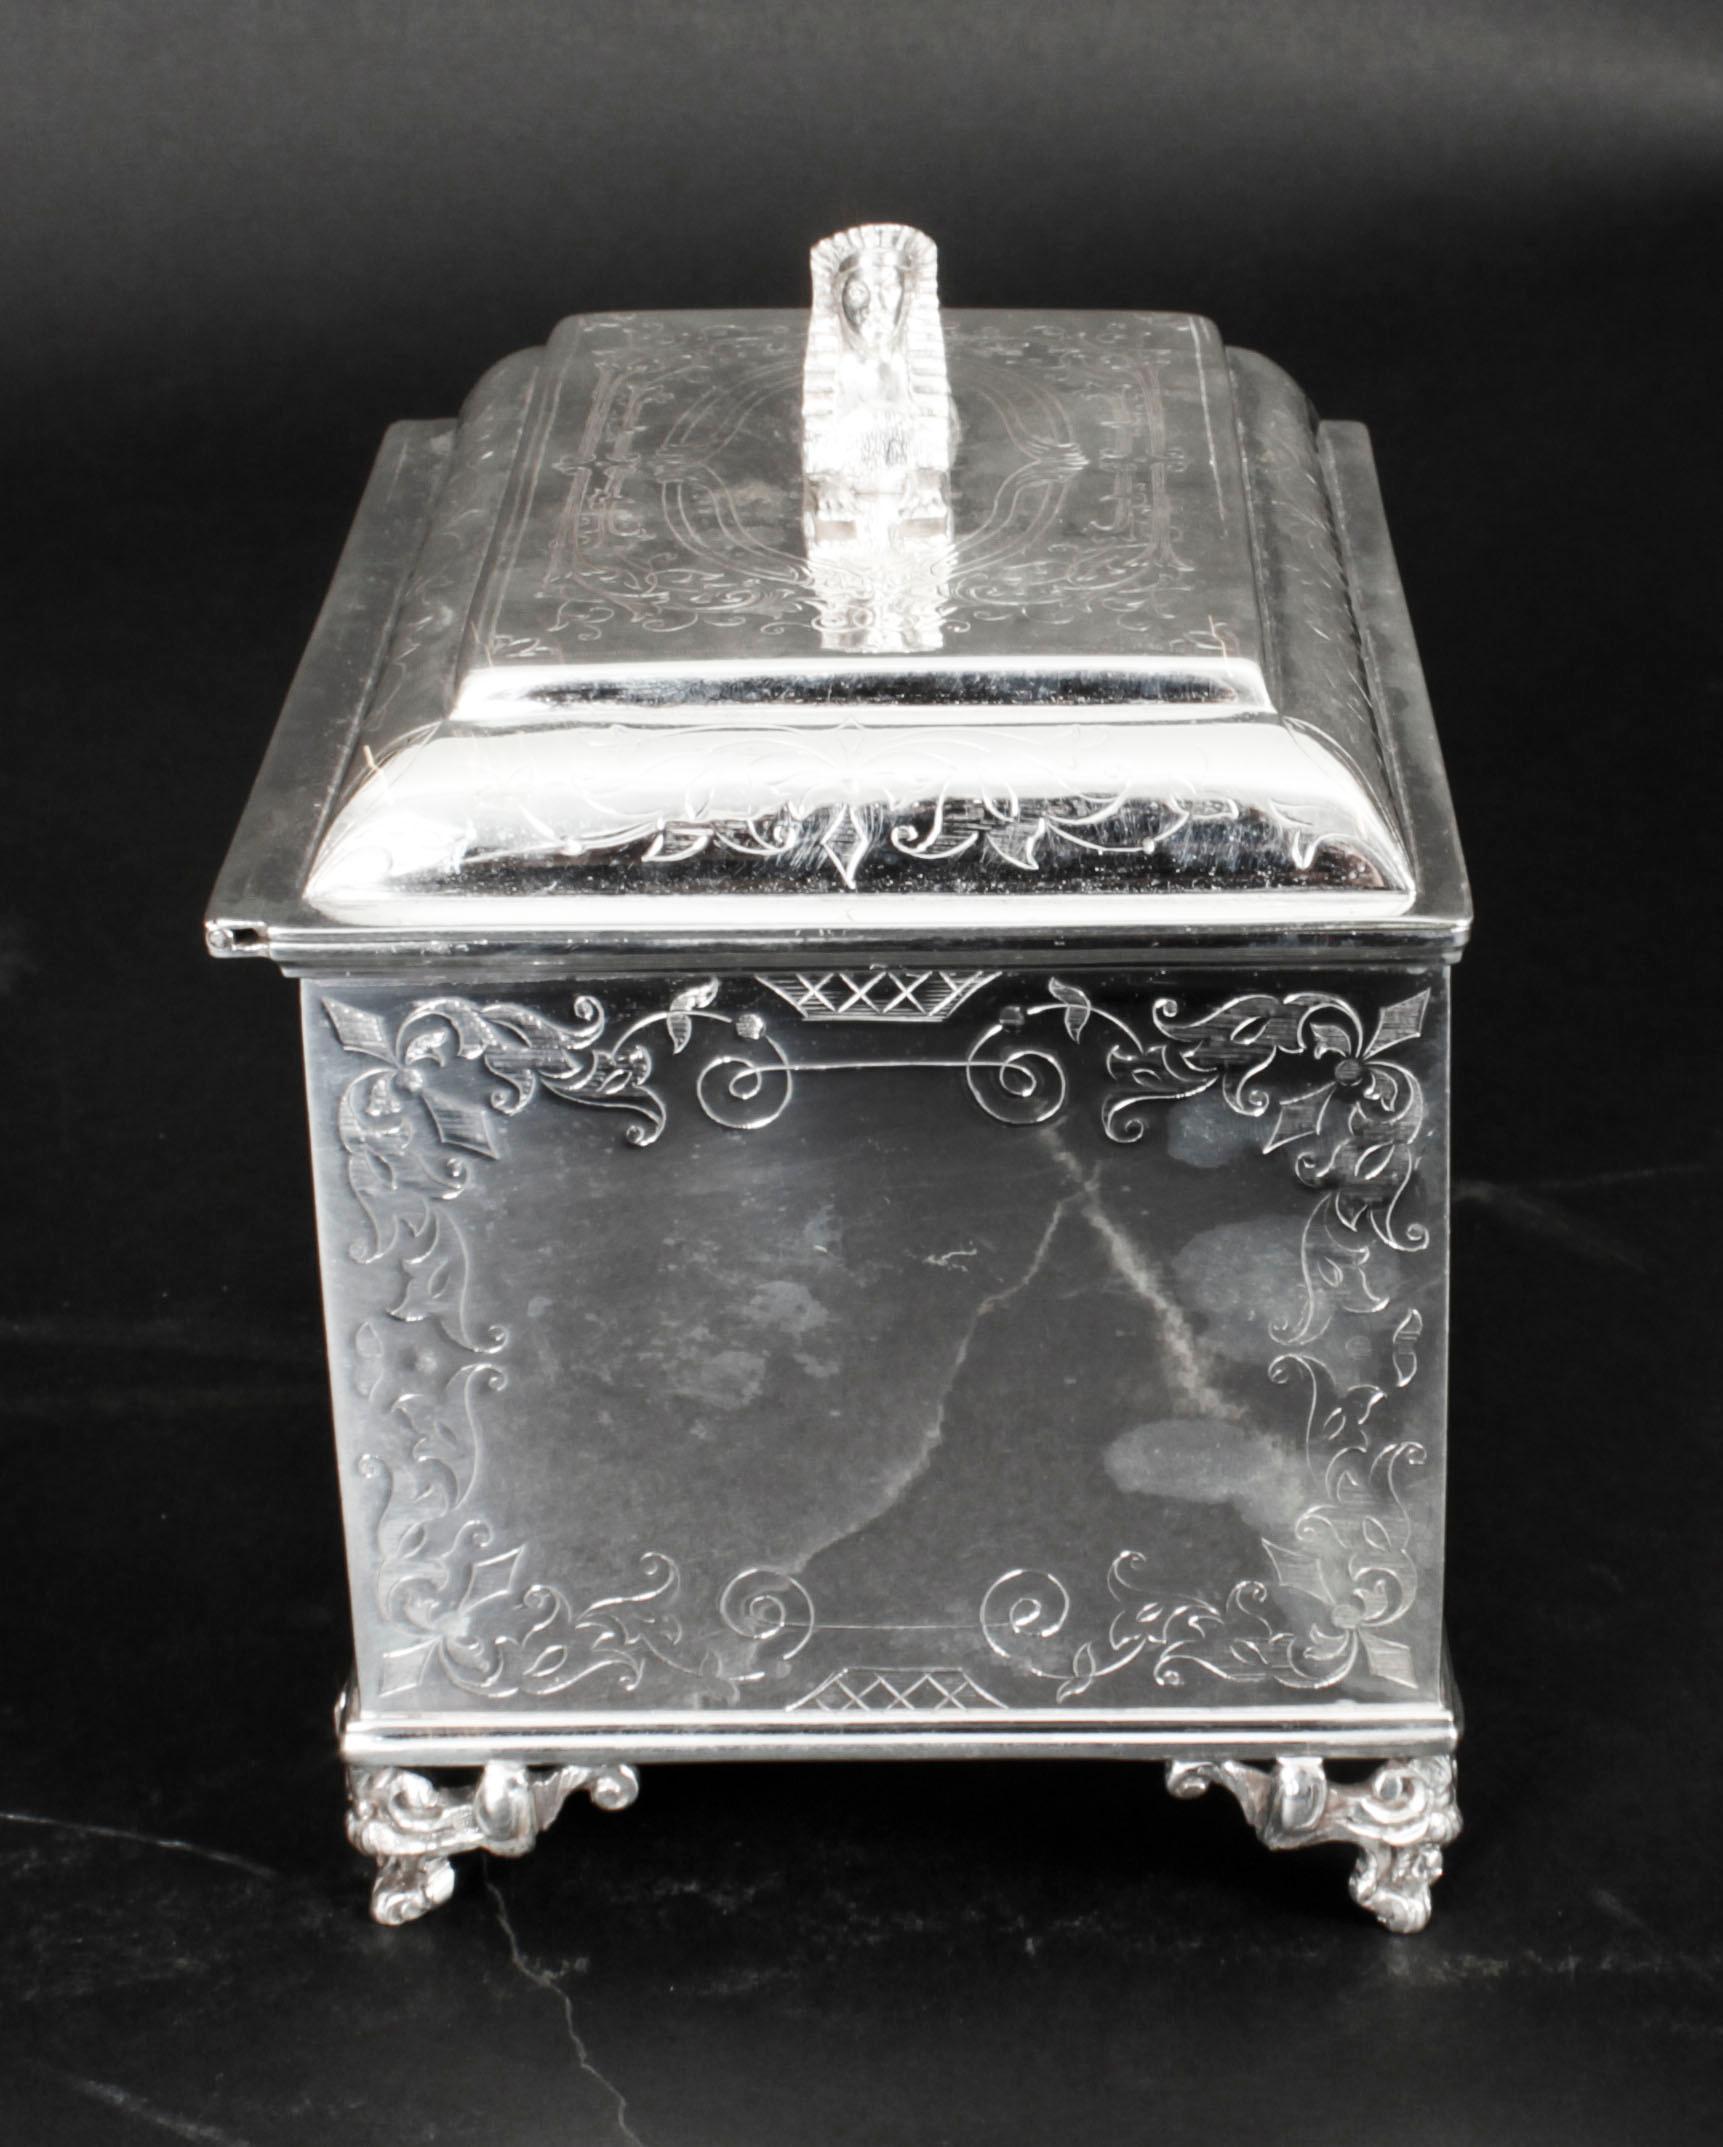 Antique Silver Plated Empire Revival Tea Caddy 19th Century For Sale 4